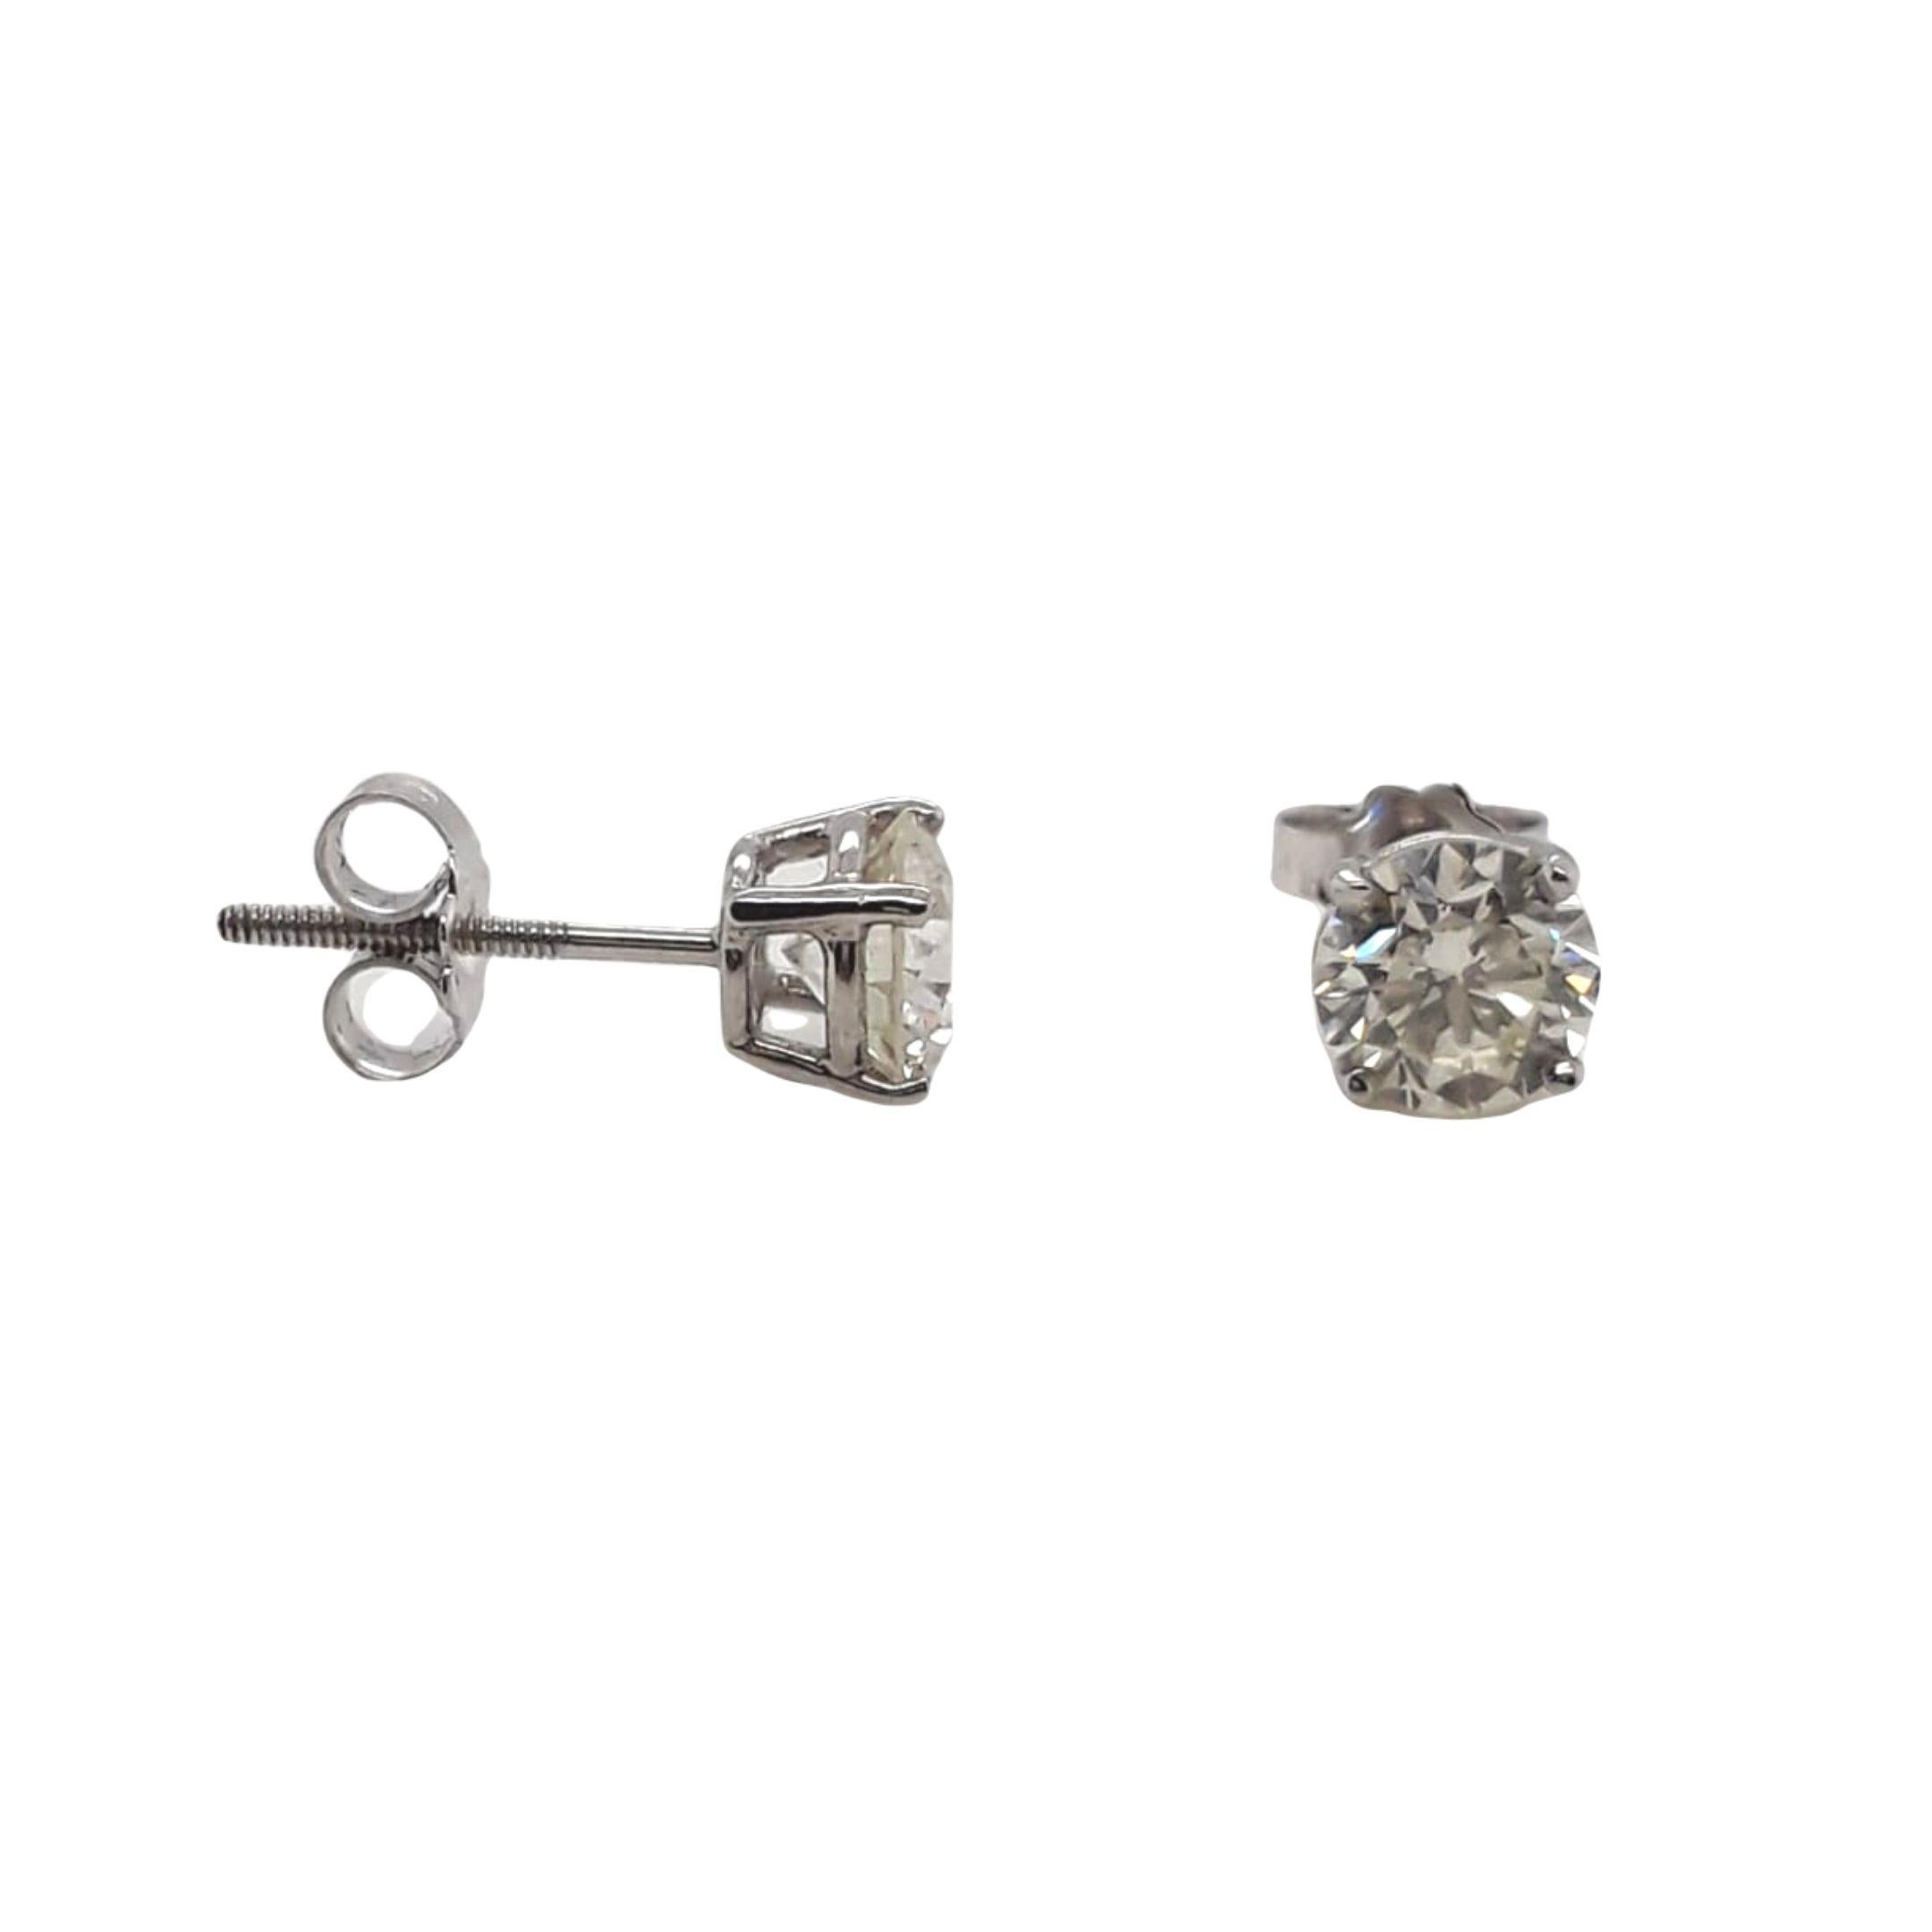 Diamond Stud Earrings made with natural brilliant cut diamonds. Total Weight: 1.82 carats, Stone Diameter: 6.18 x 6.15, Color: J-K, Clarity: VS1-VS2. Set on a 4 prong mounting in 18 karat white gold, screw back setting. 